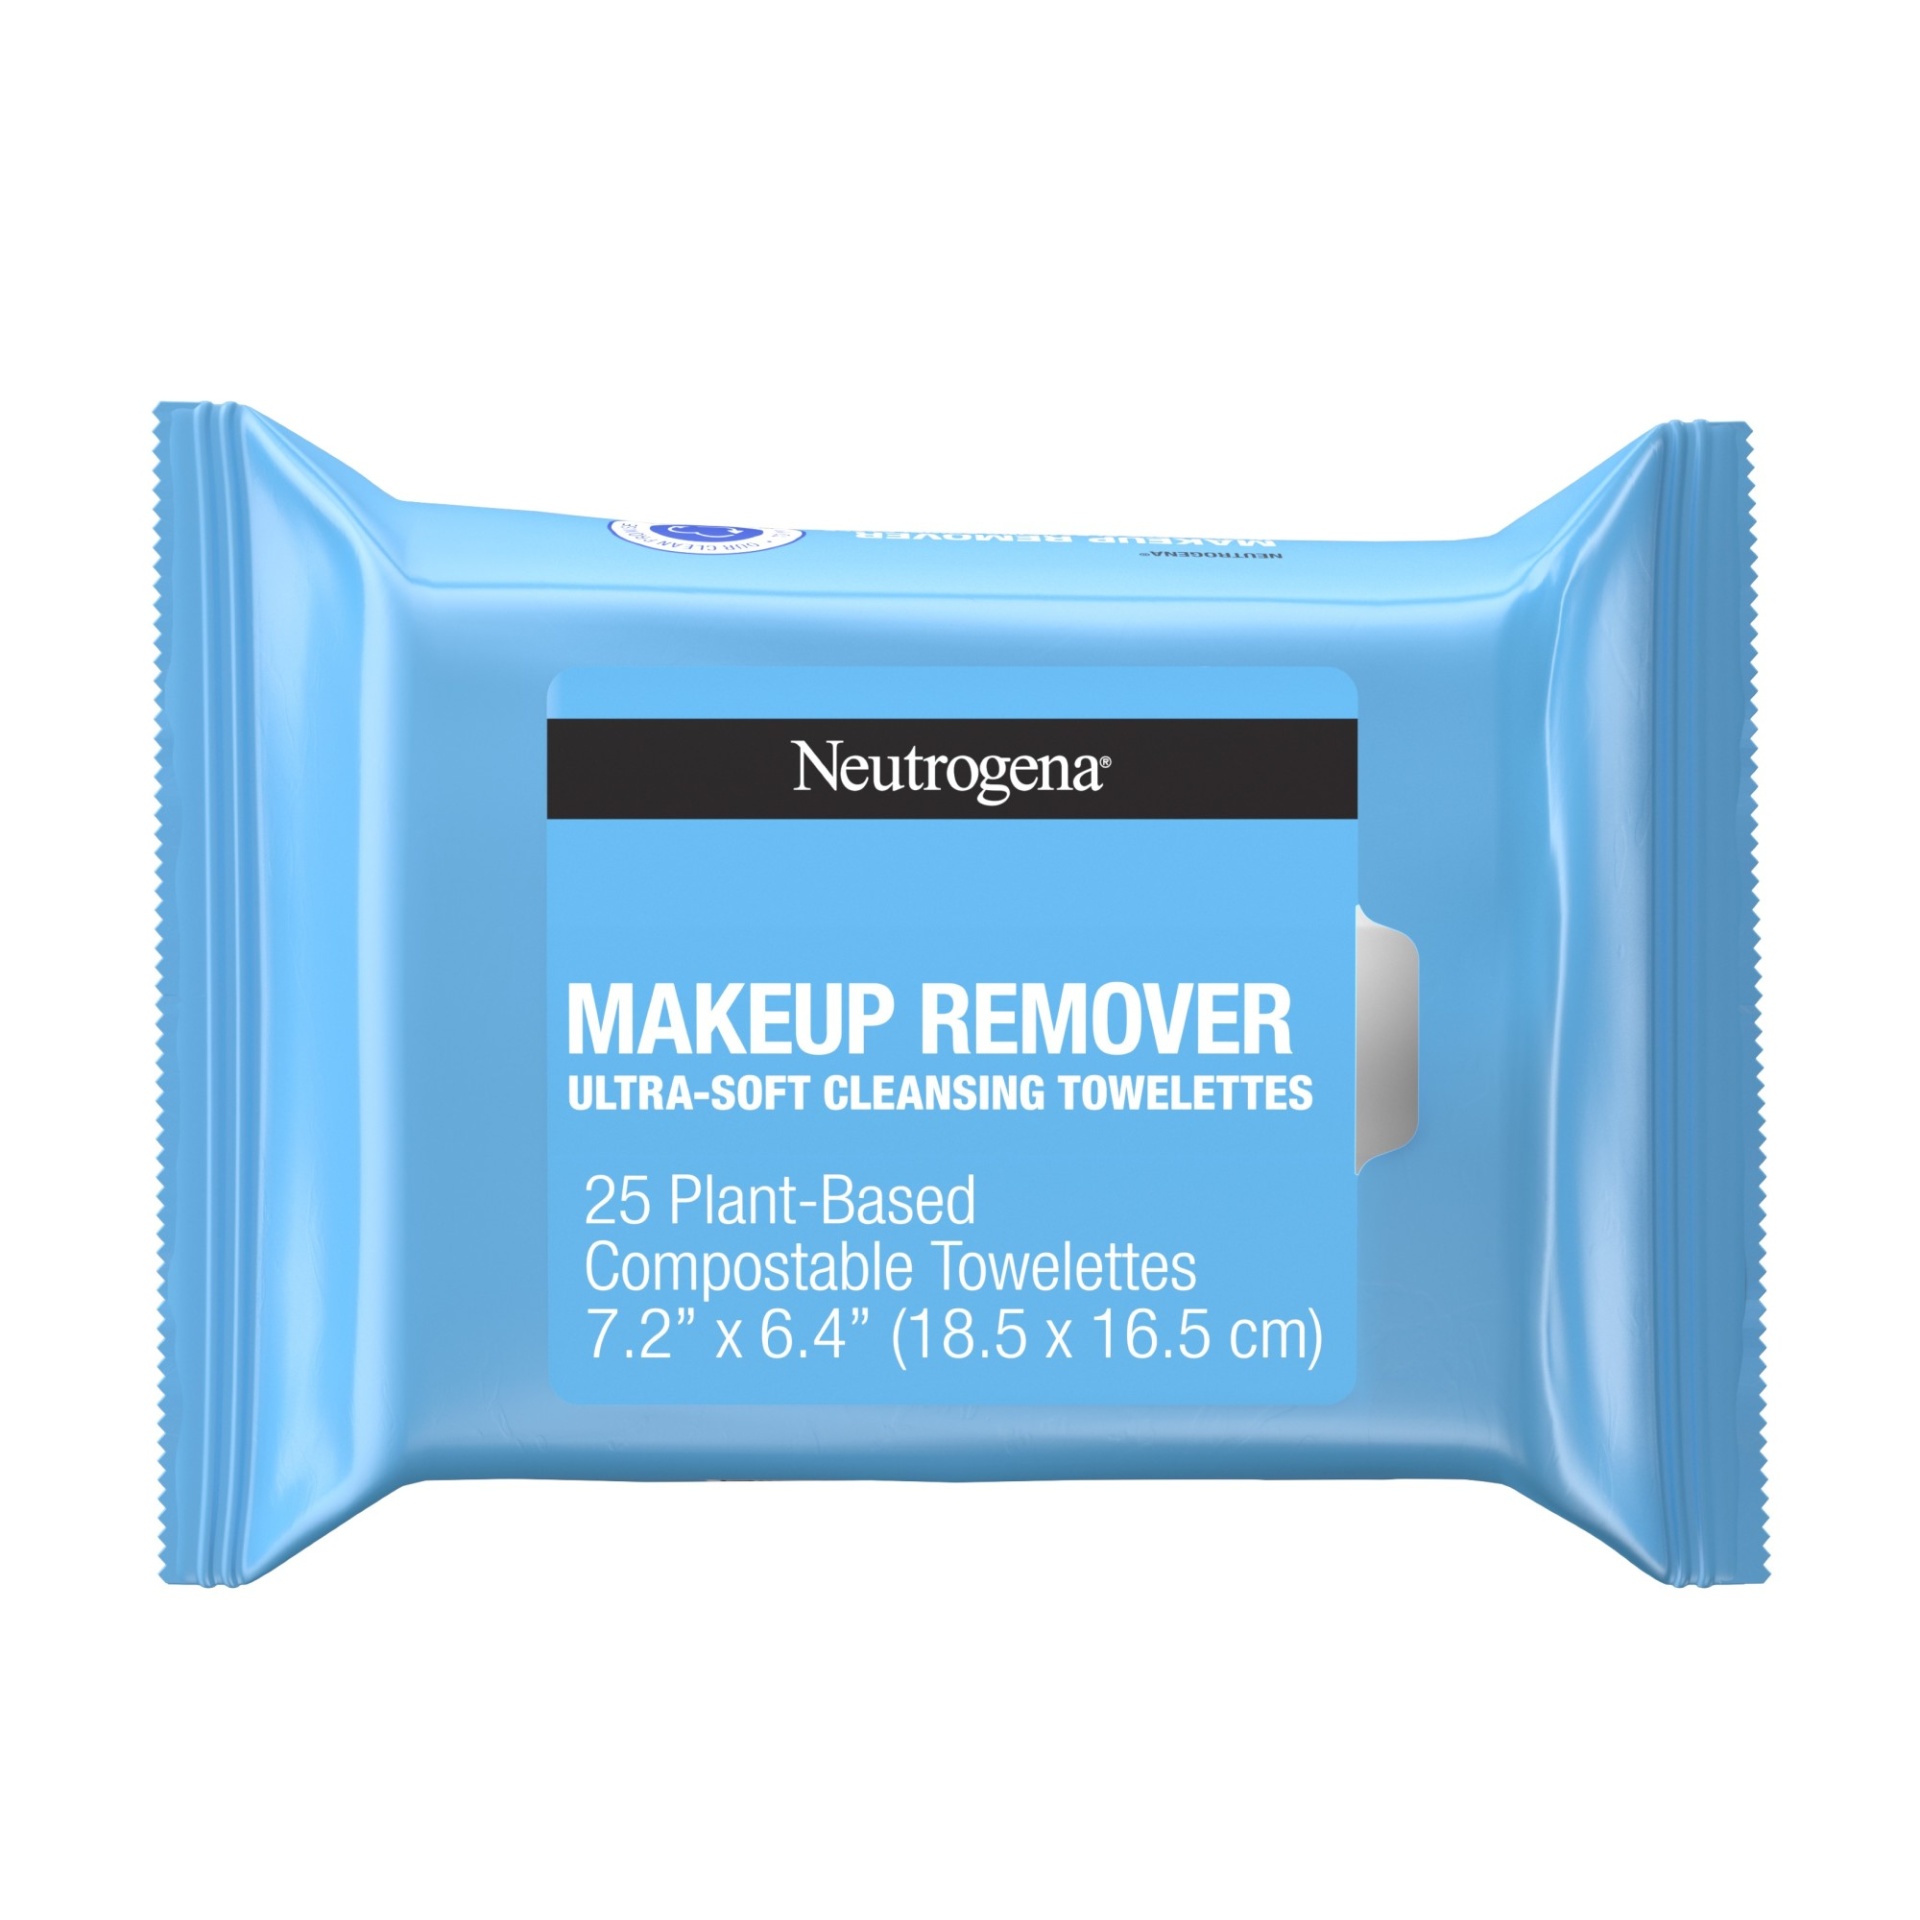 slide 1 of 6, Neutrogena Makeup Remover Facial Cleansing Towelettes, Daily Face Wipes Remove Dirt, Oil, Sweat, Makeup & Waterproof Mascara, Gentle, Soap- & Alcohol-Free, 100% Plant-Based Fibers, 25 ct